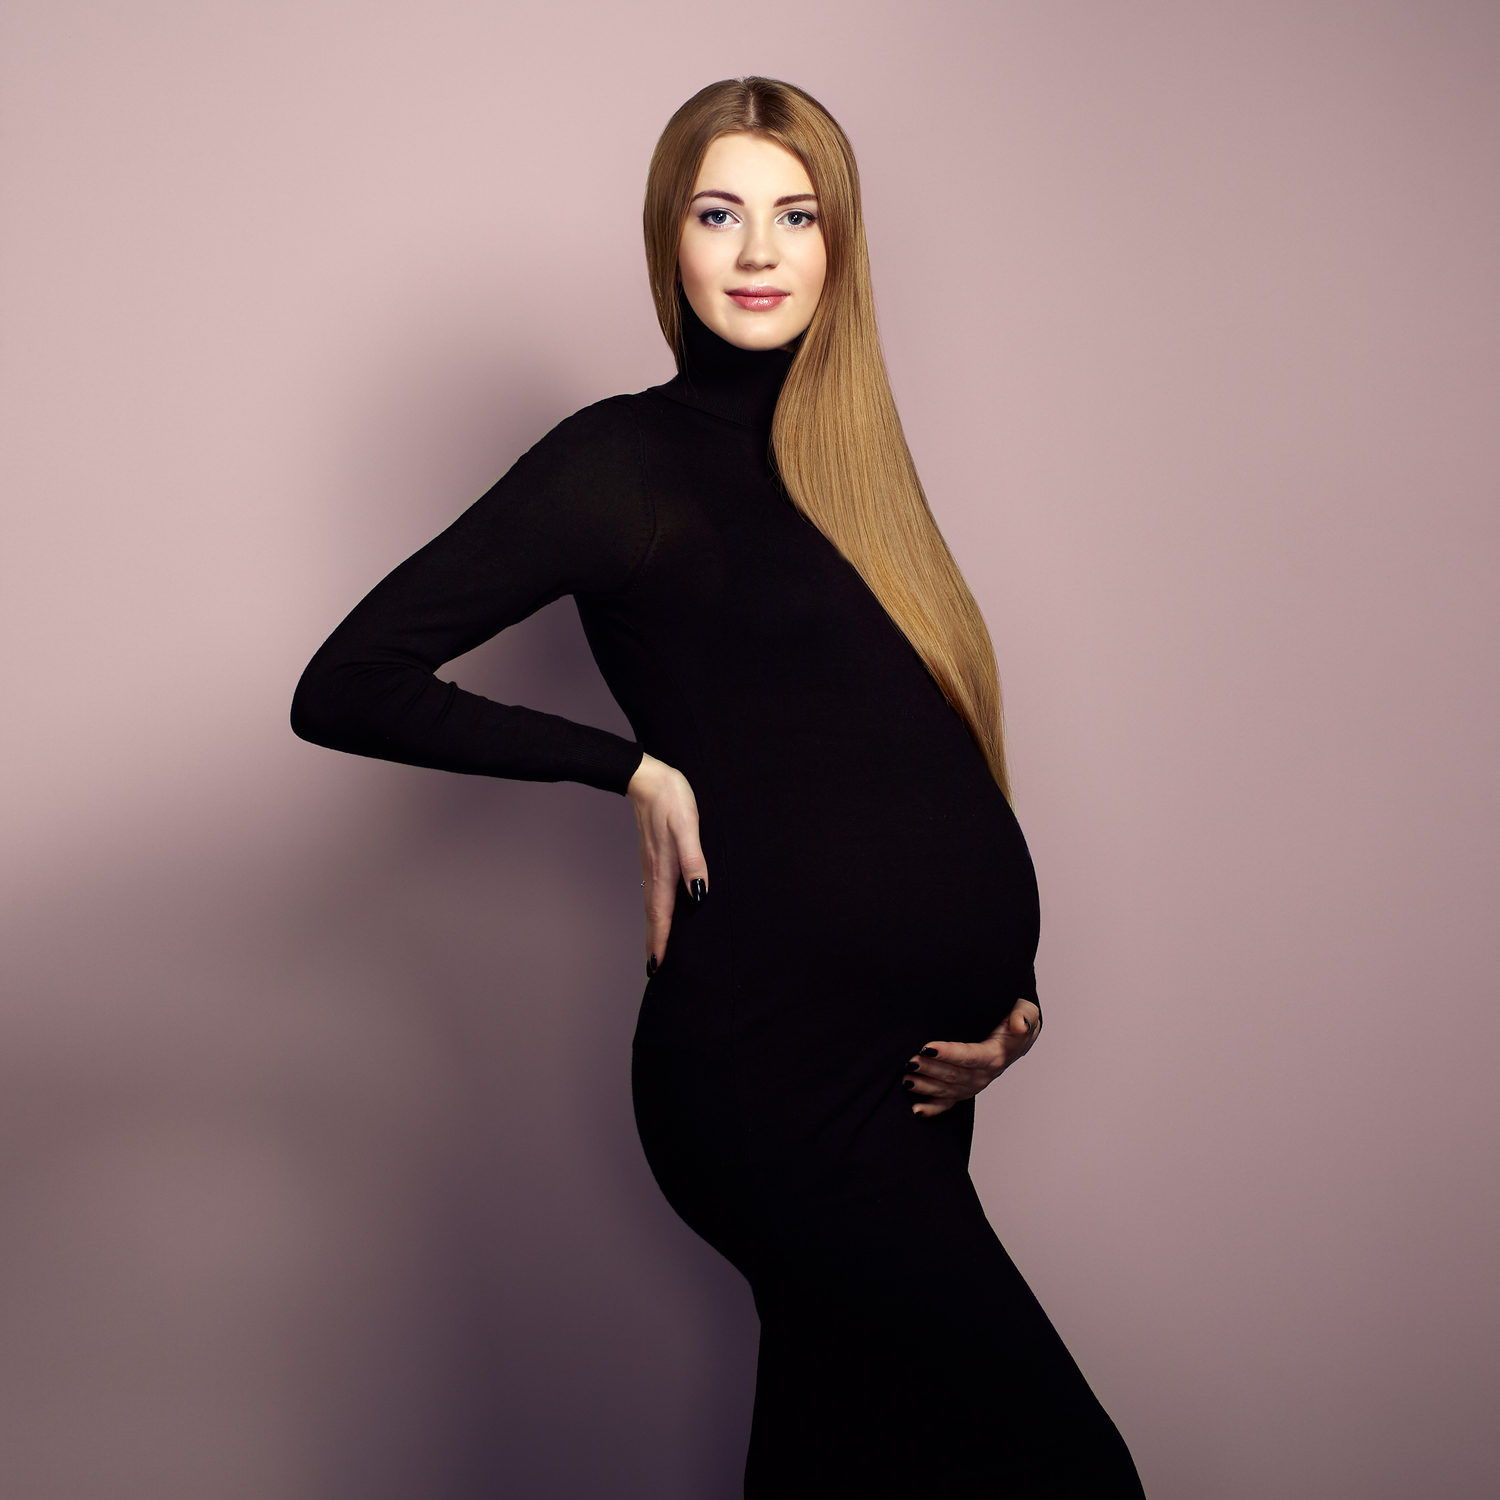 You'll Never Look at a Pregnant Woman the Same Again | Thrive Global